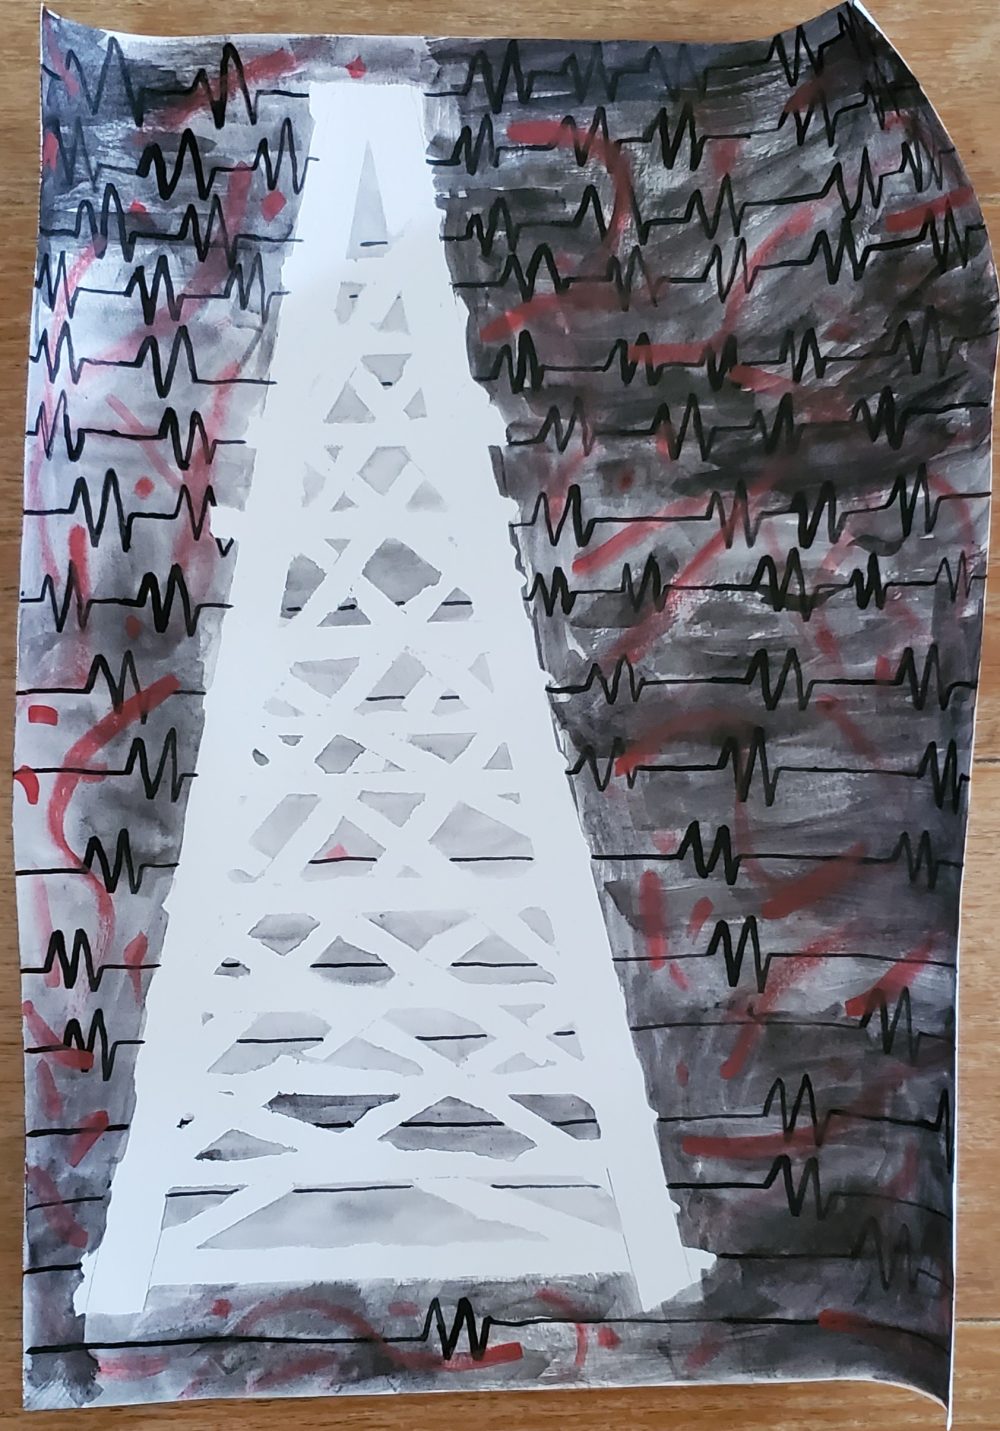 A drawing with a black and gray background with heartbeat vitals, a white tower in the middle, and red paint smeared all over the background.